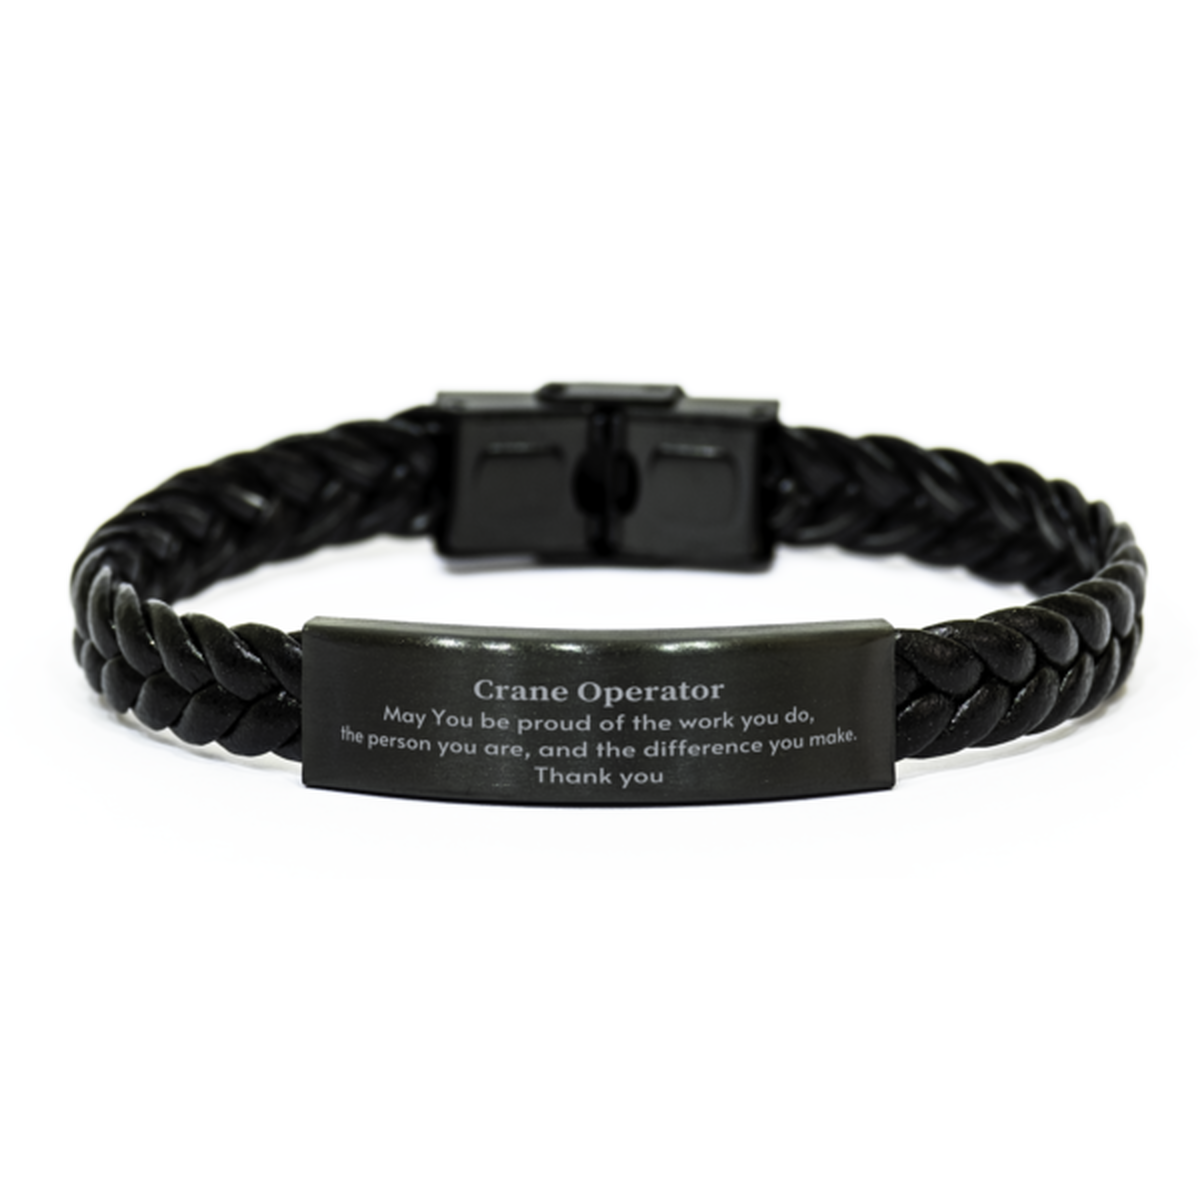 Heartwarming Braided Leather Bracelet Retirement Coworkers Gifts for Crane Operator, Crane Operator May You be proud of the work you do, the person you are Gifts for Boss Men Women Friends